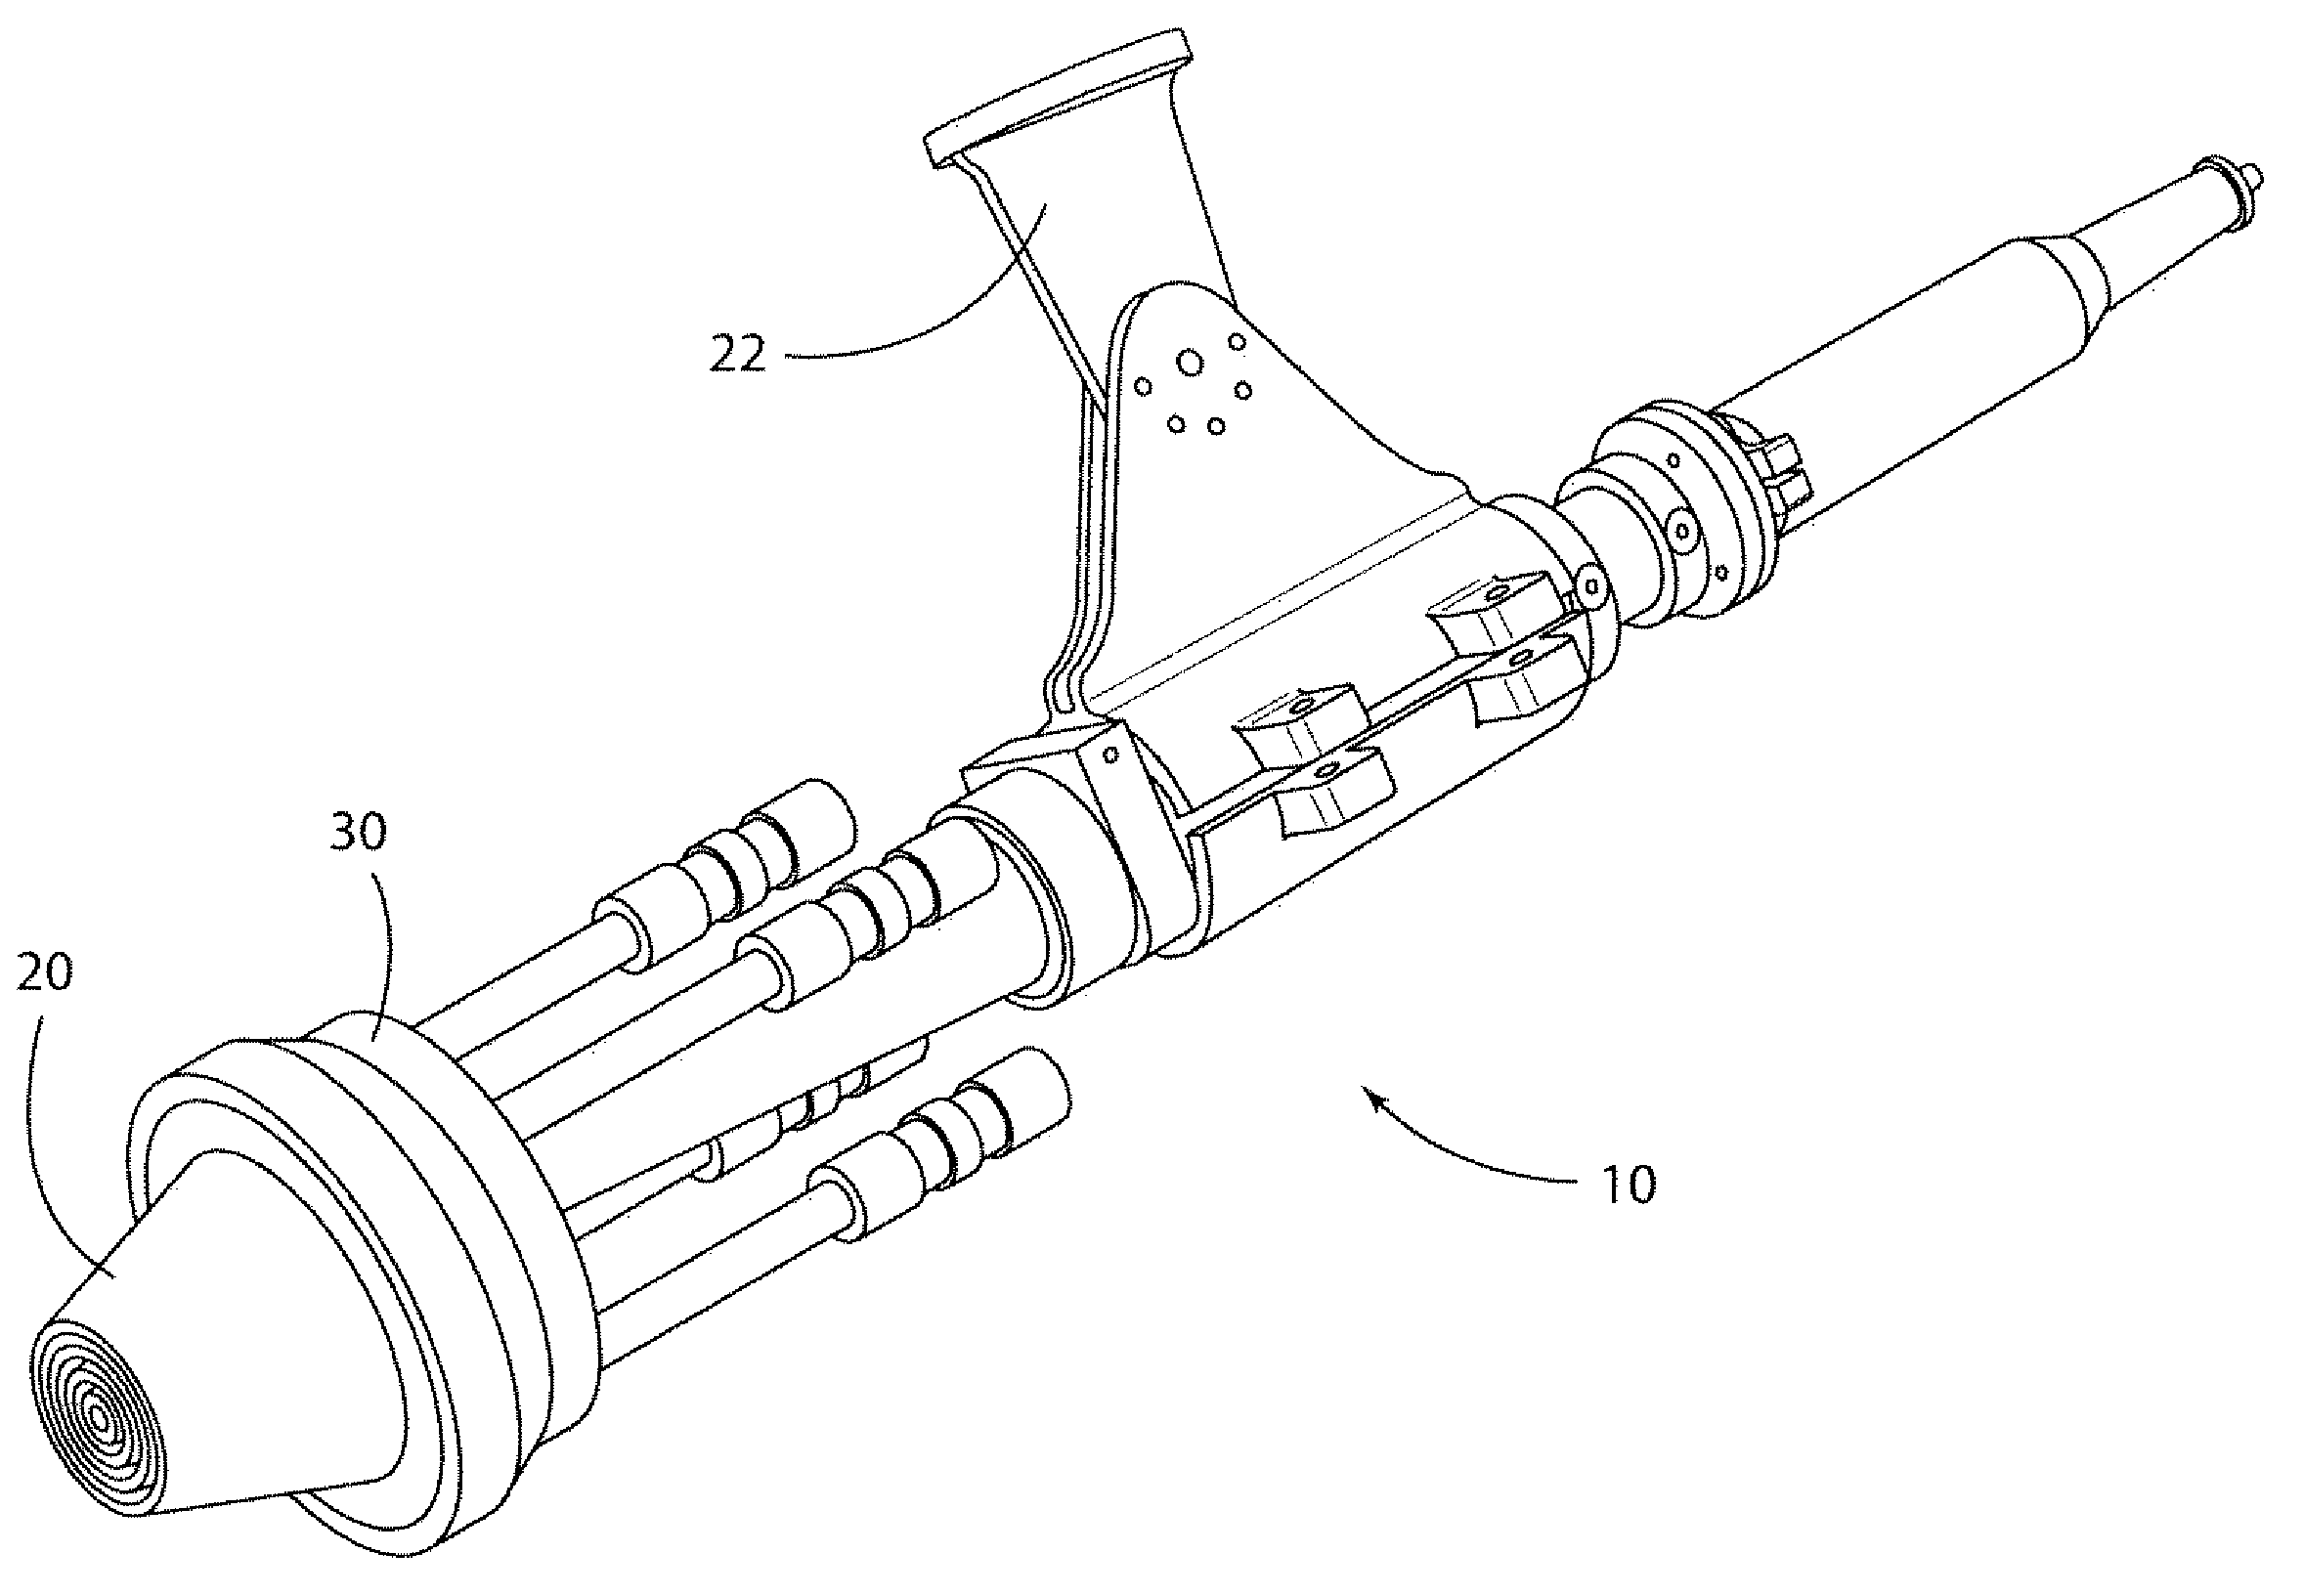 Laser cladding device with an improved nozzle